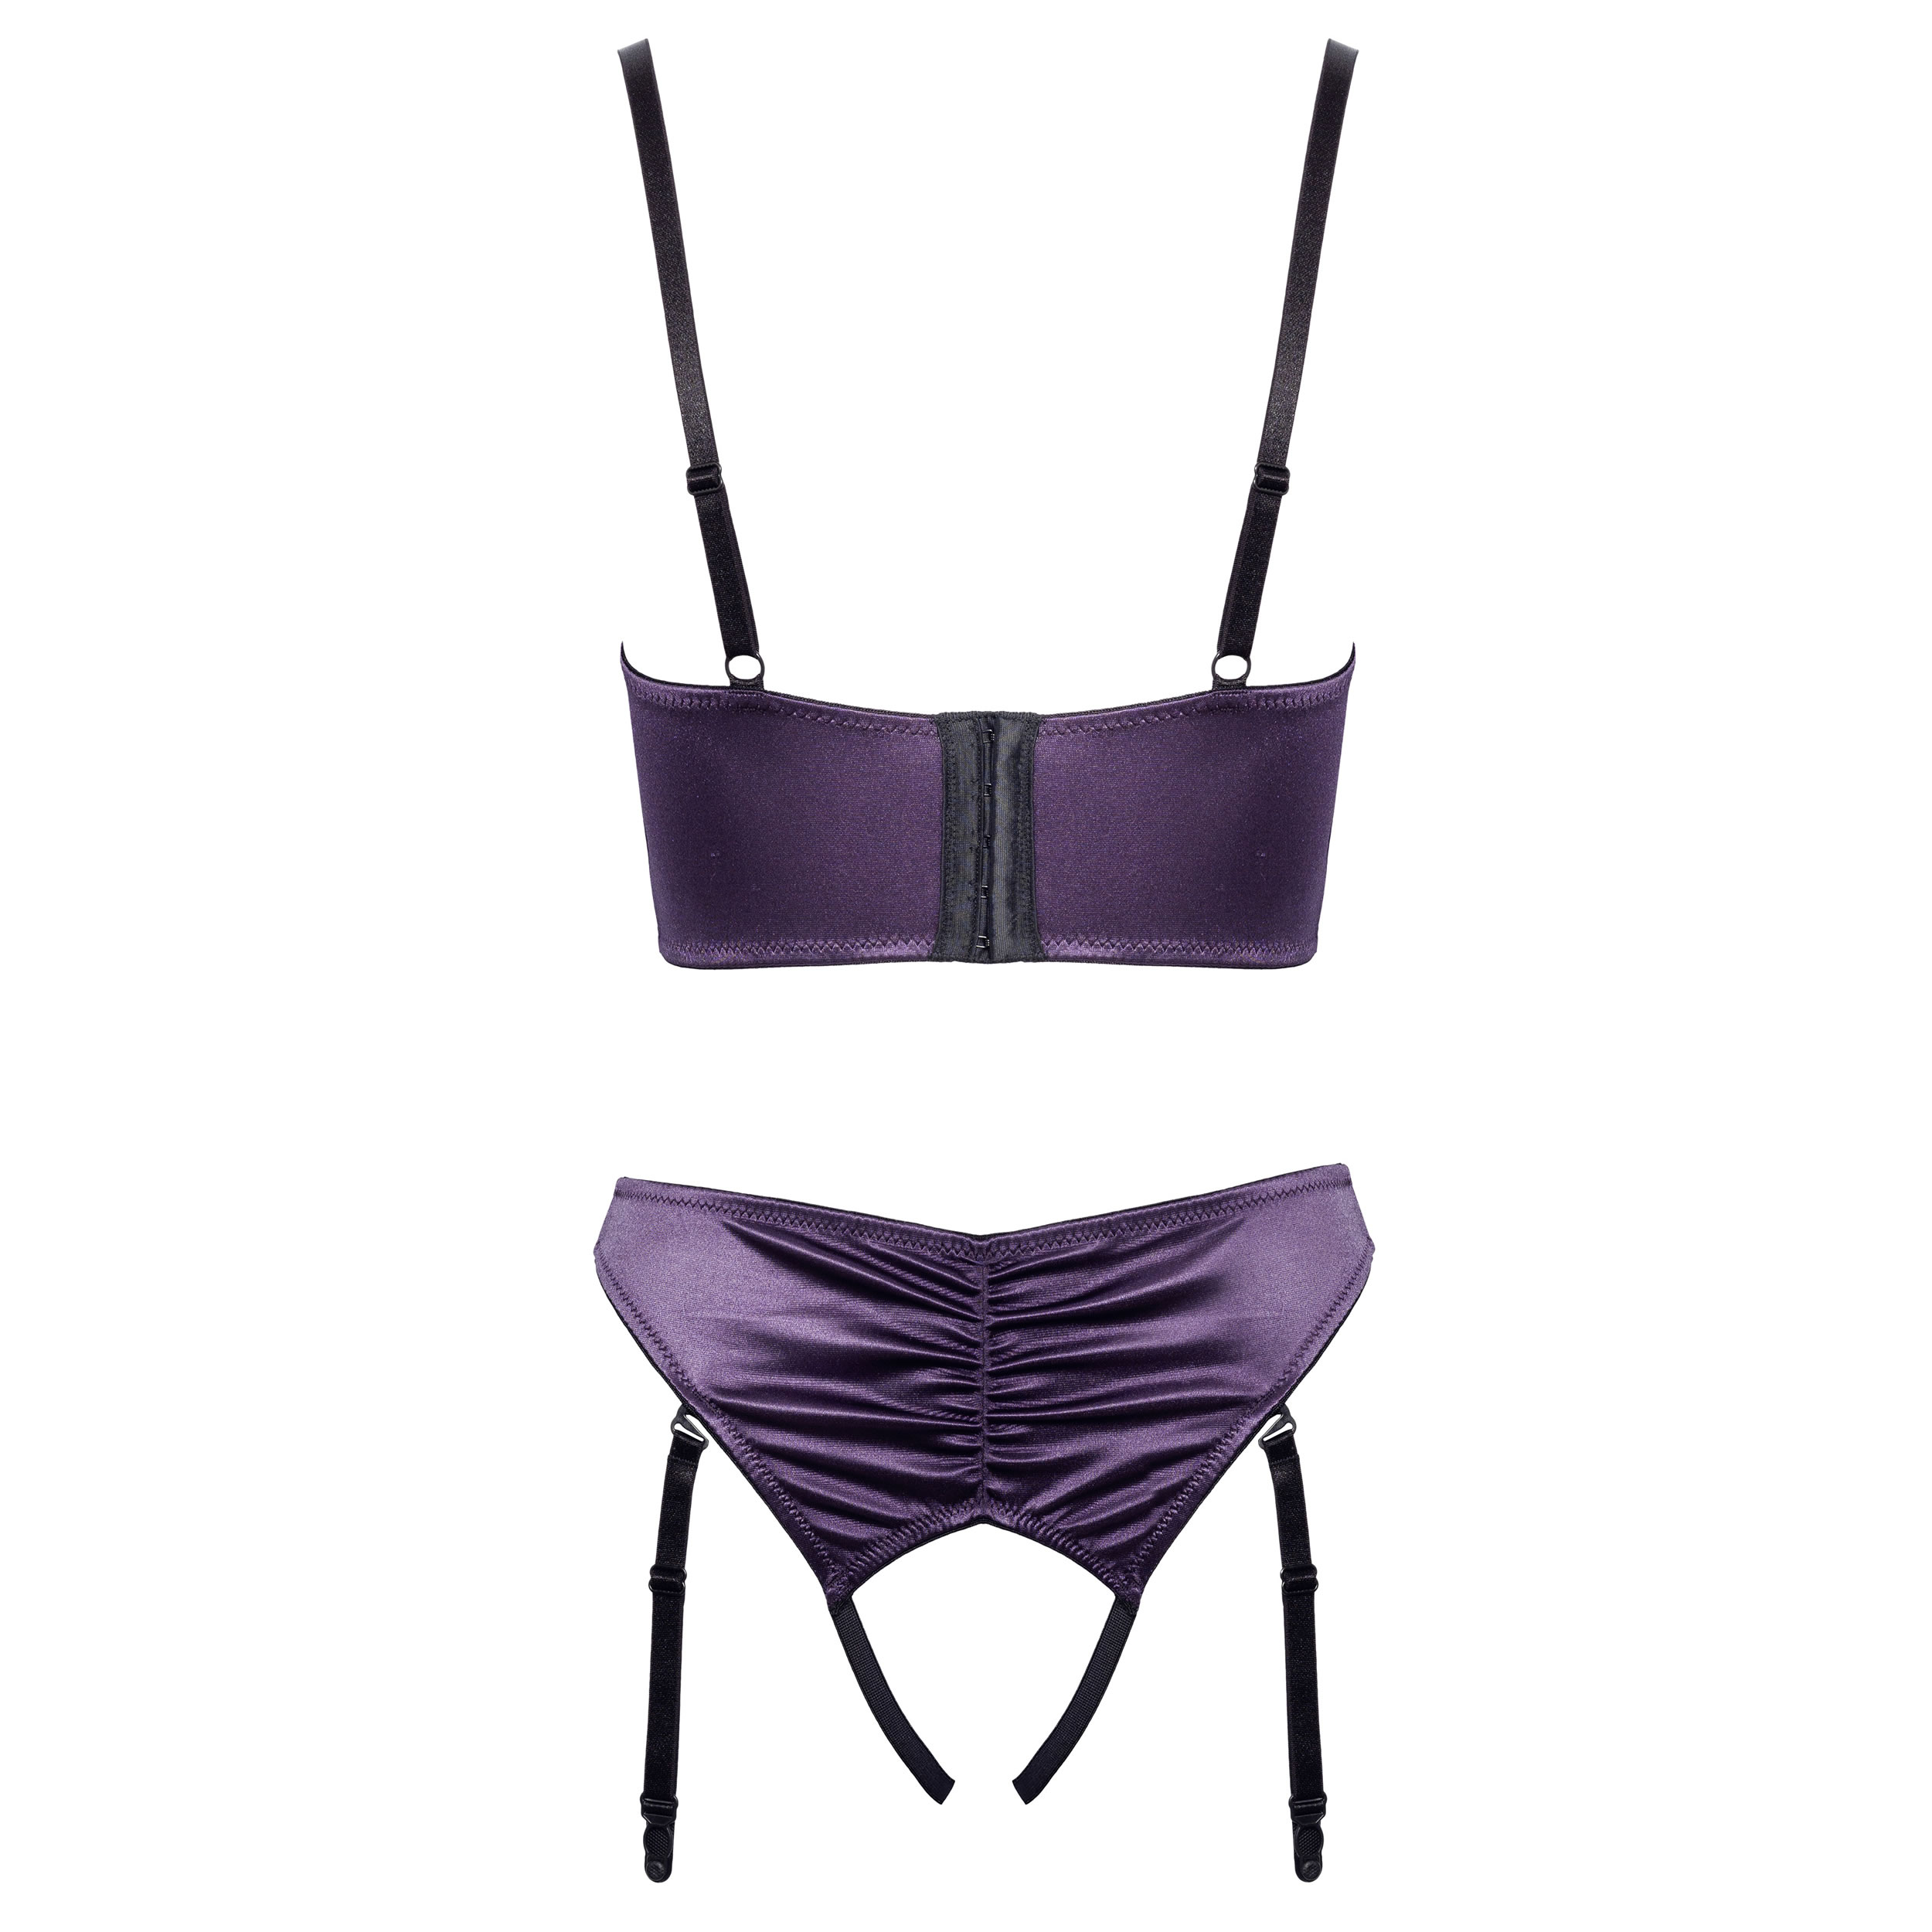 Shelf bra and Crotchless Suspender thong in Purple